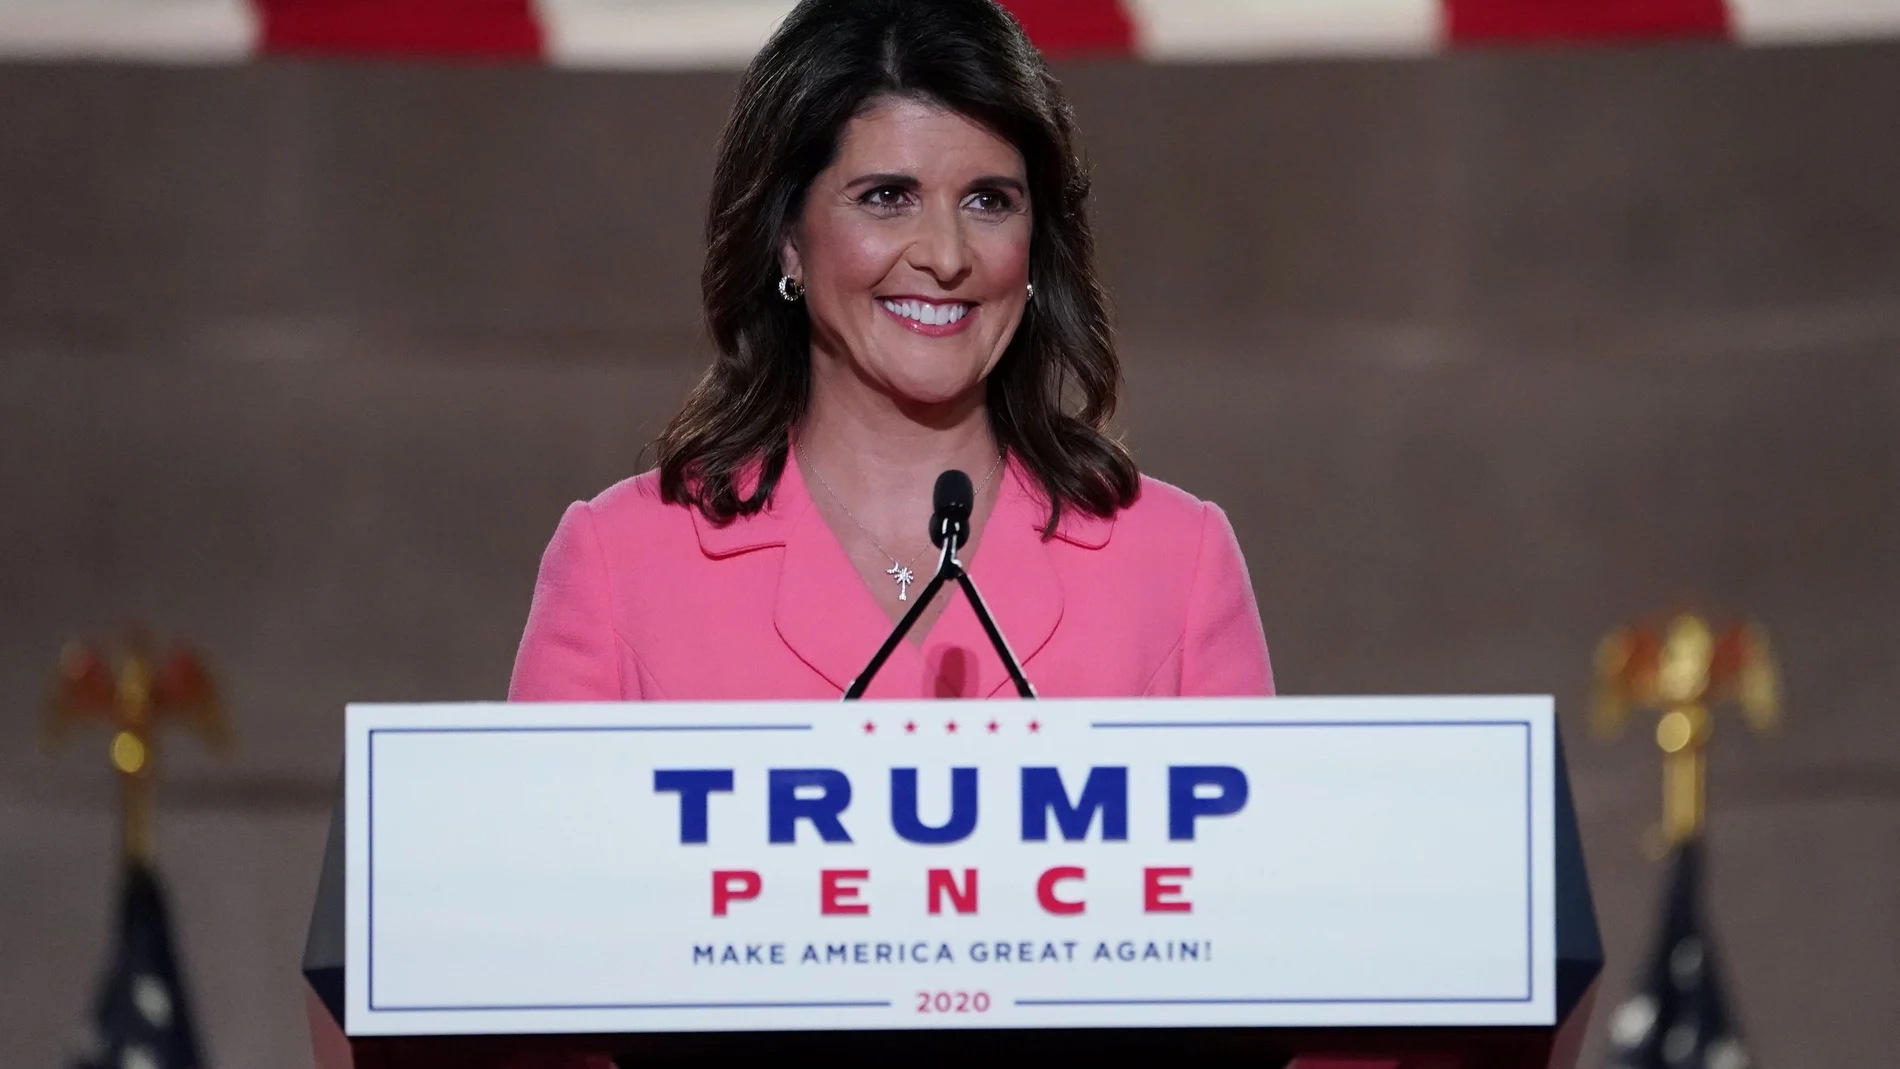 Former U.S. Ambassador to the United Nations Nikki Haley speaks to the 2020 Republican National Convention in a live address from Washington